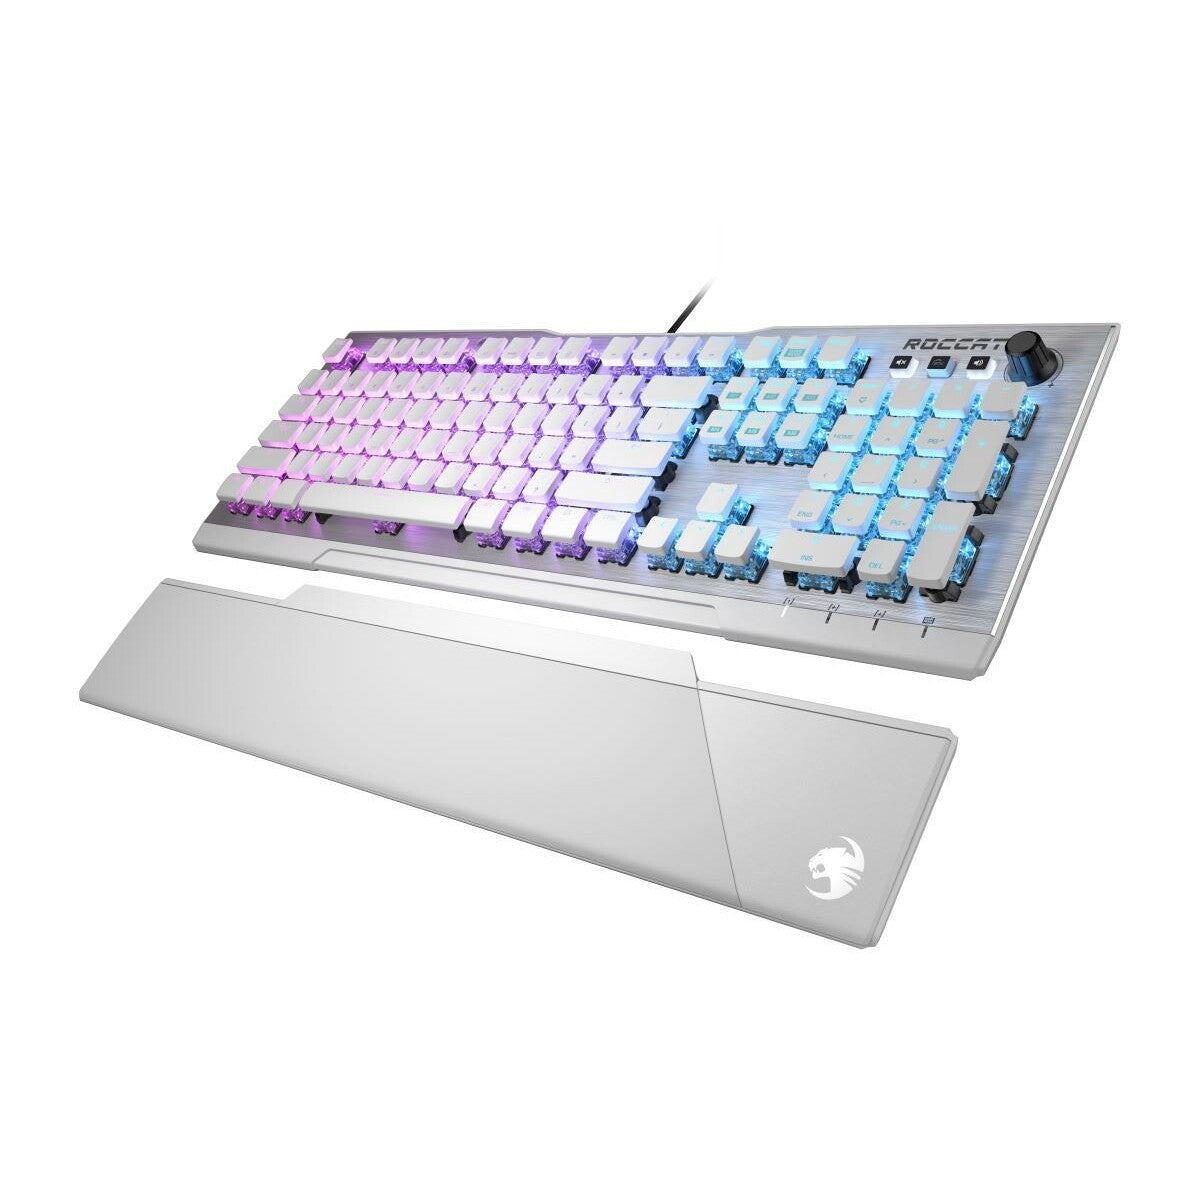 ROCCAT herní klávesnice Vulcan 122 AIMO, Tactile Brown Switch